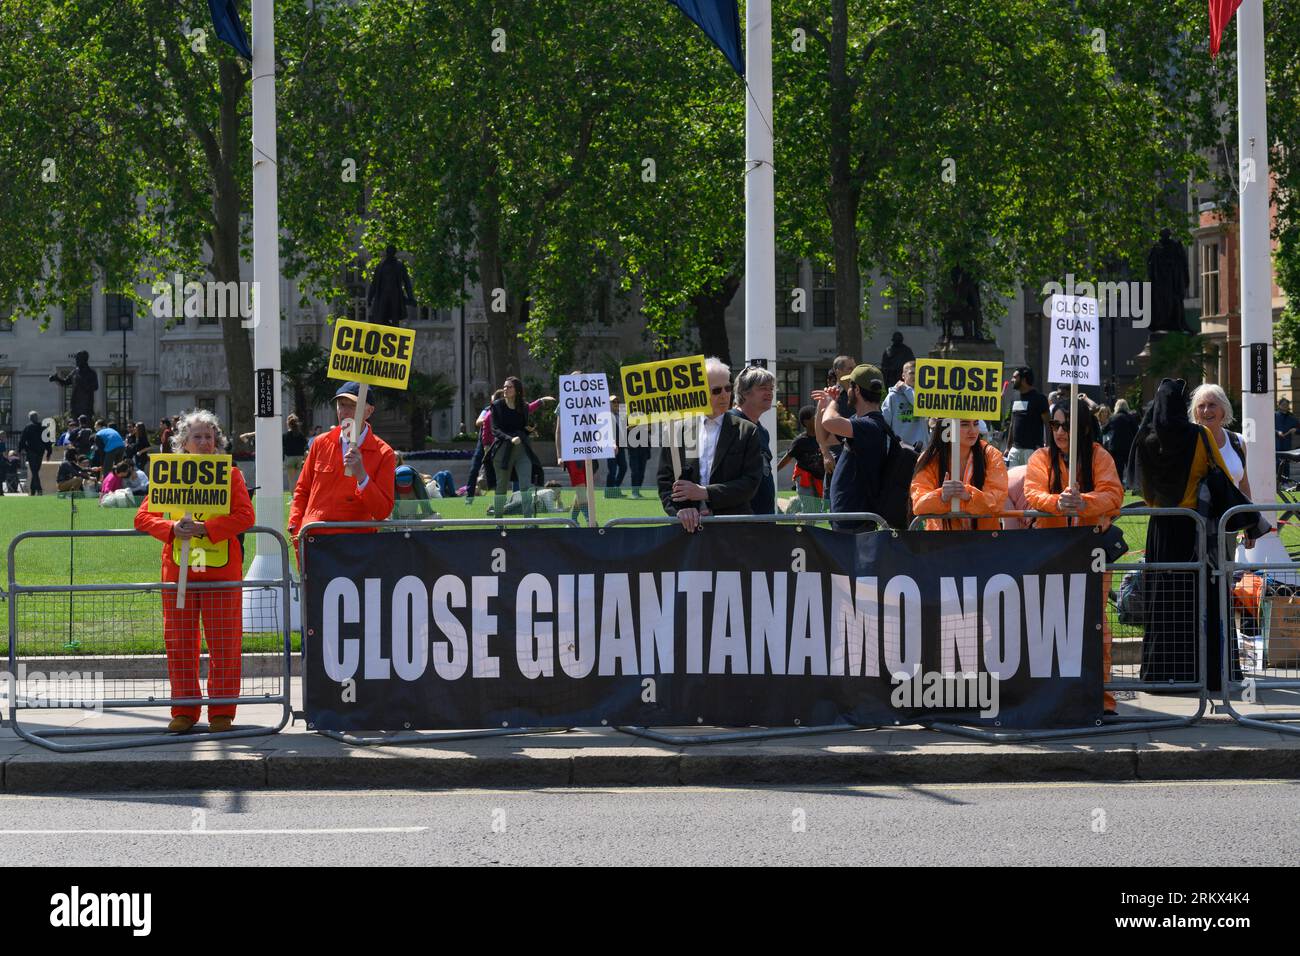 A close Guantanamo demonstration outside the Houses of Parliament, Parliament Square, London, UK.  7 Jun 2023 Stock Photo